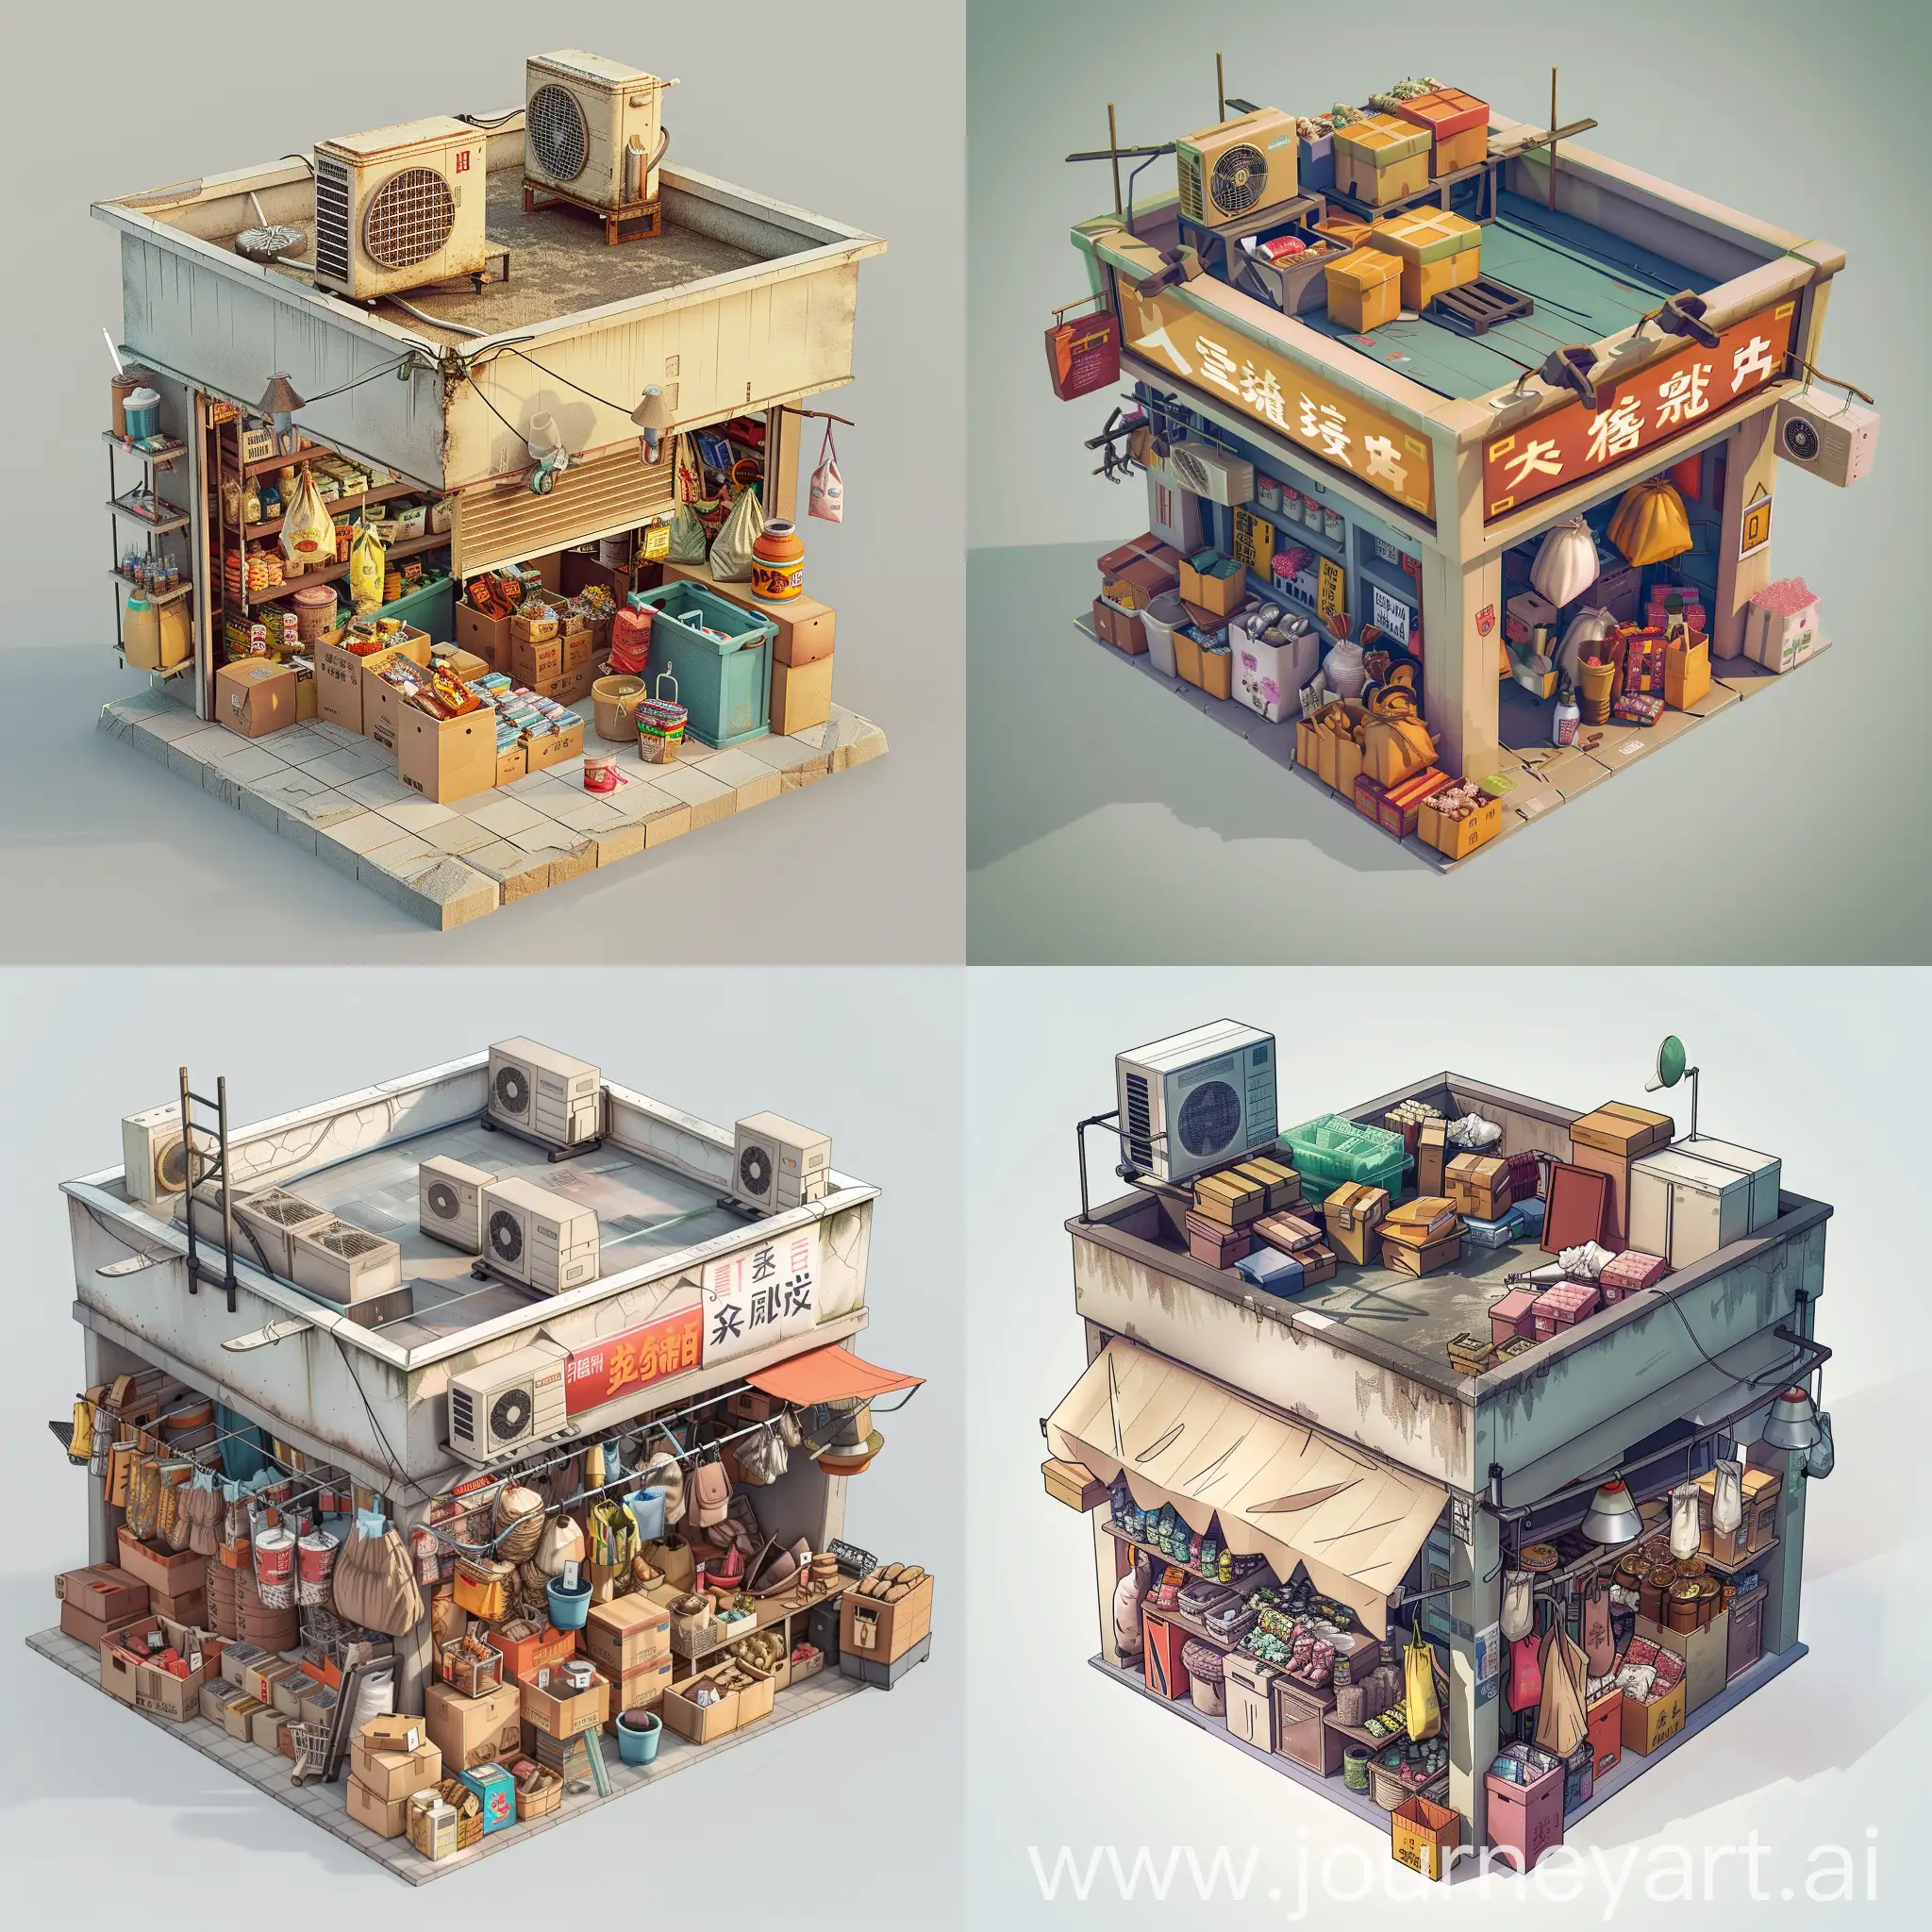 Eclectic-Hong-Kong-Junk-Shop-in-Vibrant-3D-Game-Style